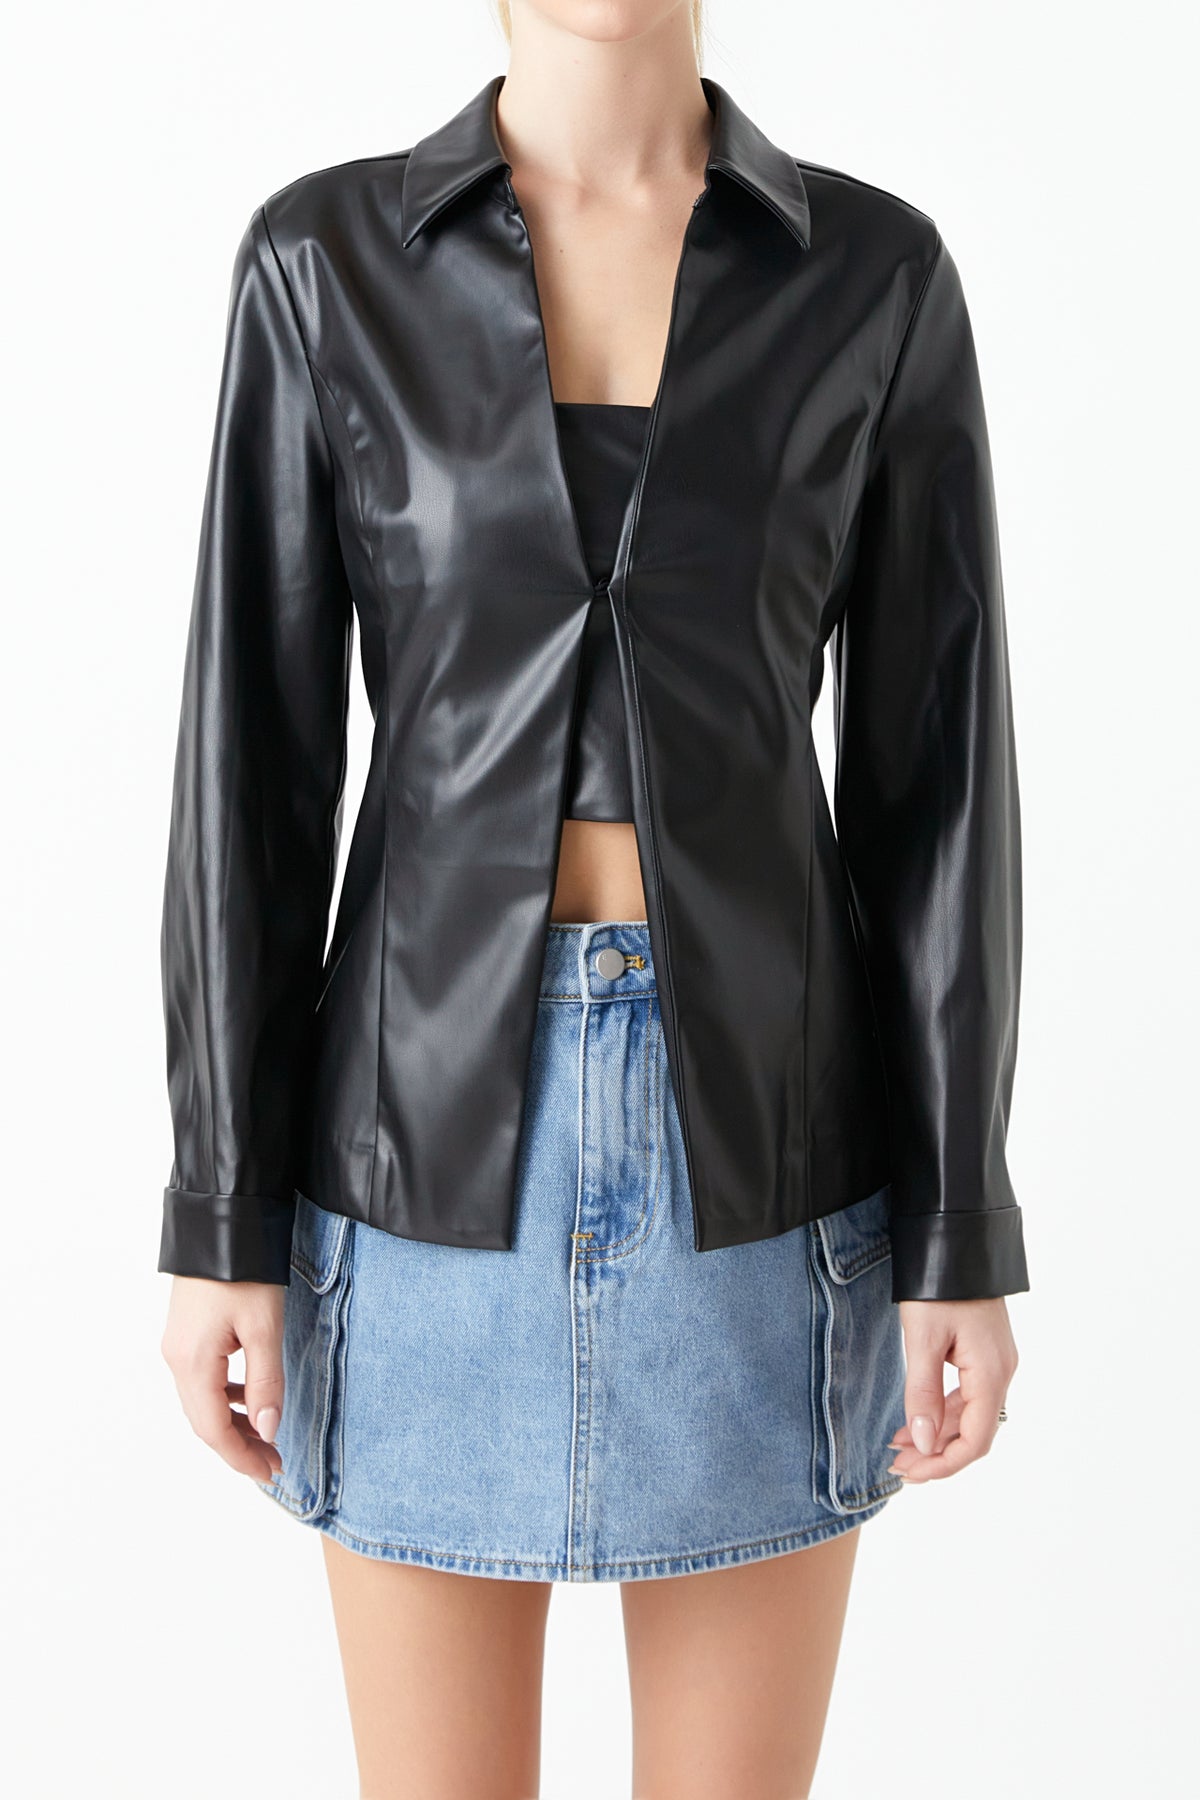 GREY LAB - Faux Leather Jacket Set - JACKETS available at Objectrare